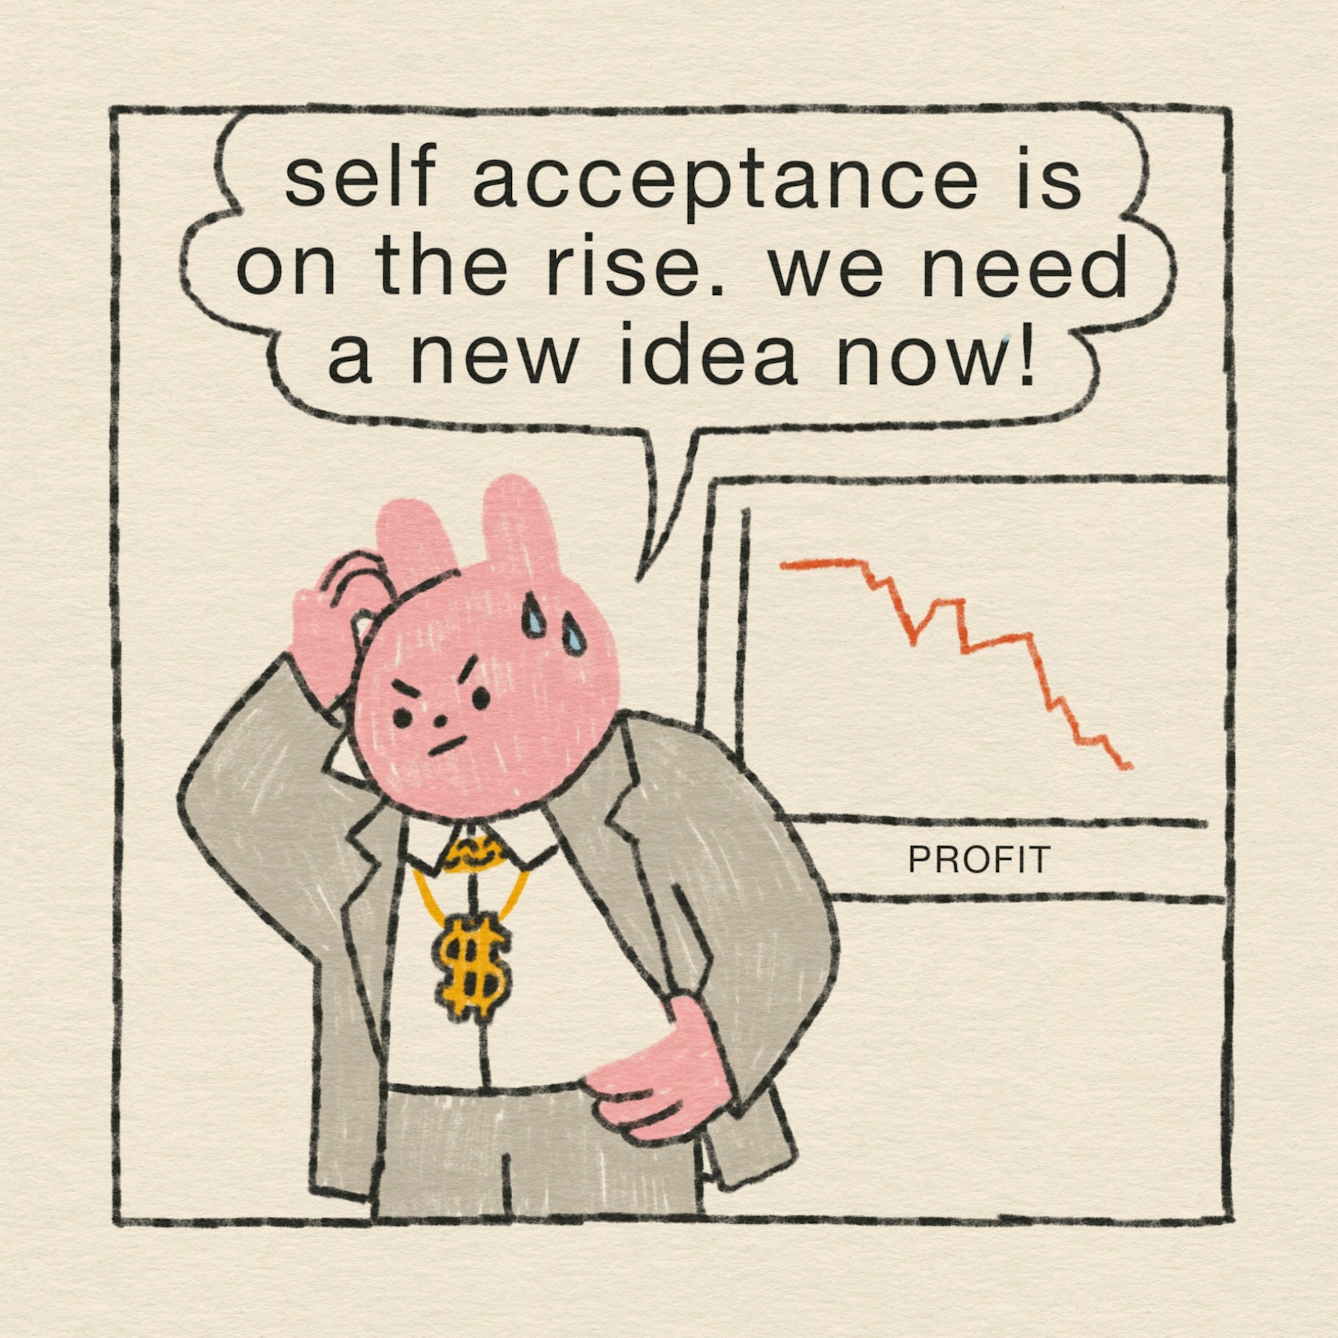 Panel 1 of 4: The CEO looks stressed. He’s wearing his grey suit and a gold chain with a dollar sign on it, and has sweat dripping down his face. Behind him is a graph which shows company profits are falling. “Self-acceptance is on the rise. We need a new idea now!”, he says.